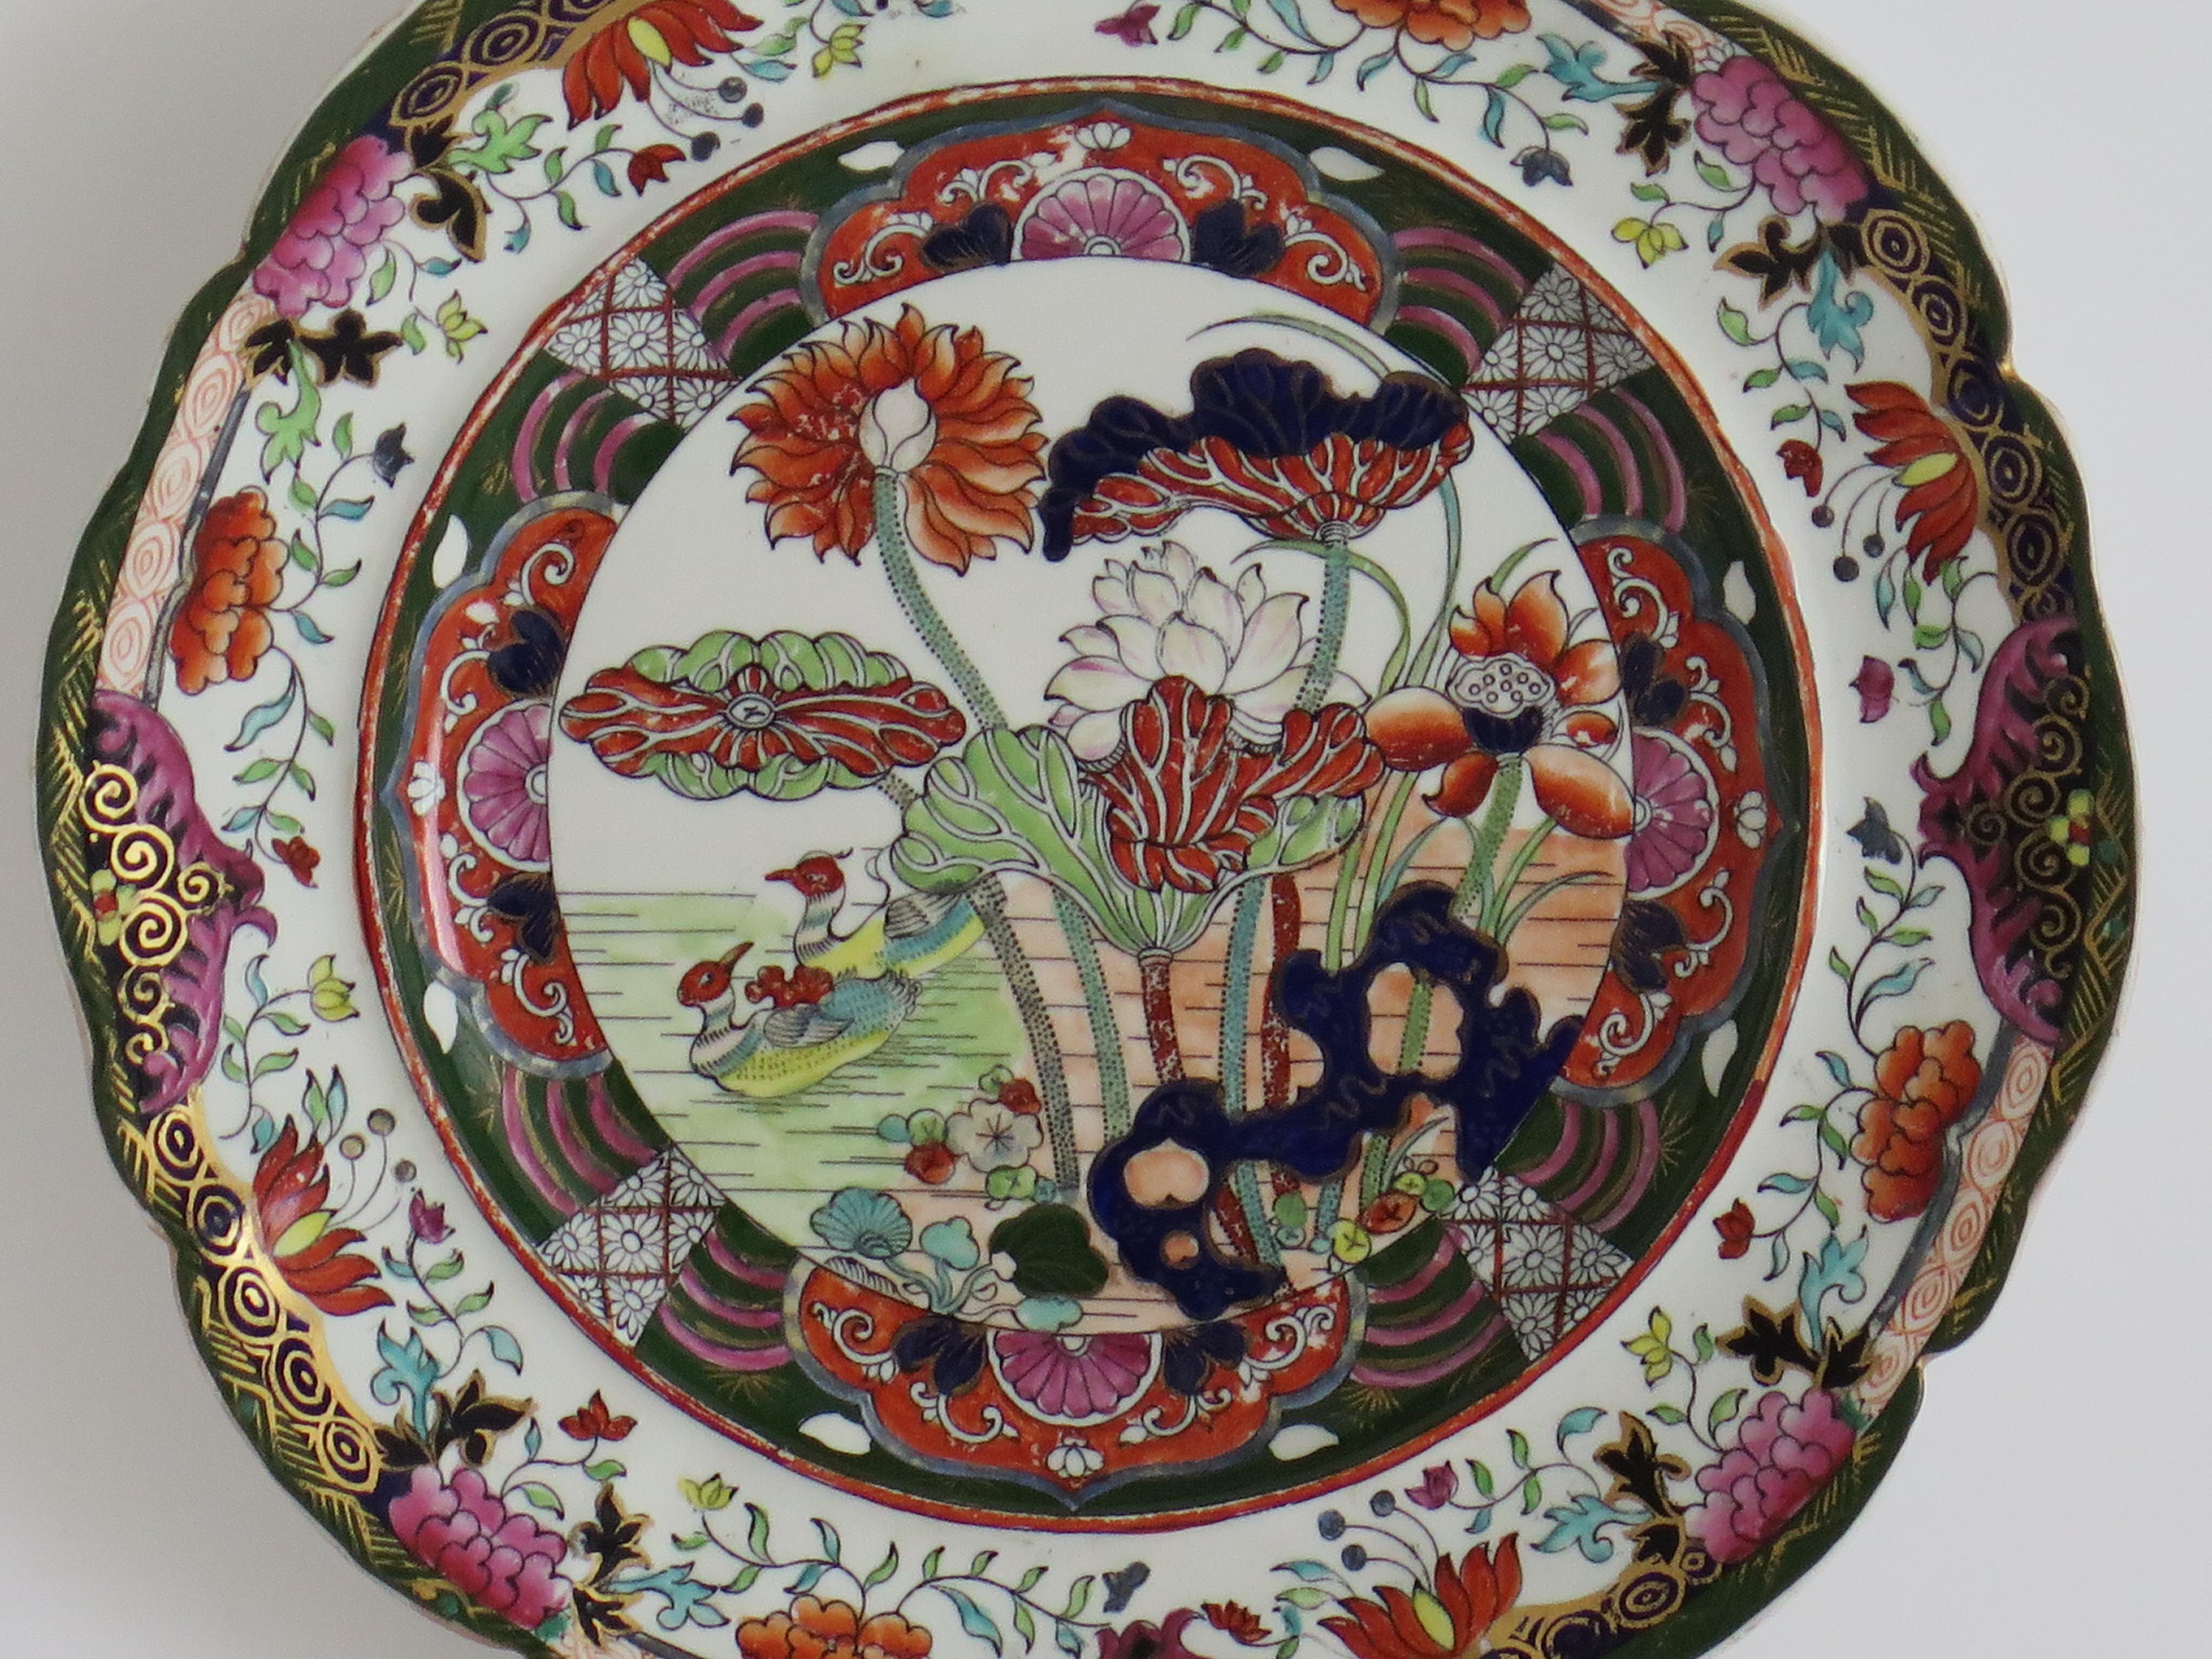 This is a beautifully hand painted Large Dinner Plate in the rare Muscove Duck pattern by Mason's Ironstone, Lane Delph, England, dating to circa 1825.

The piece is well potted with a slightly ribbed side edge and moulded wavy rim.

The pattern